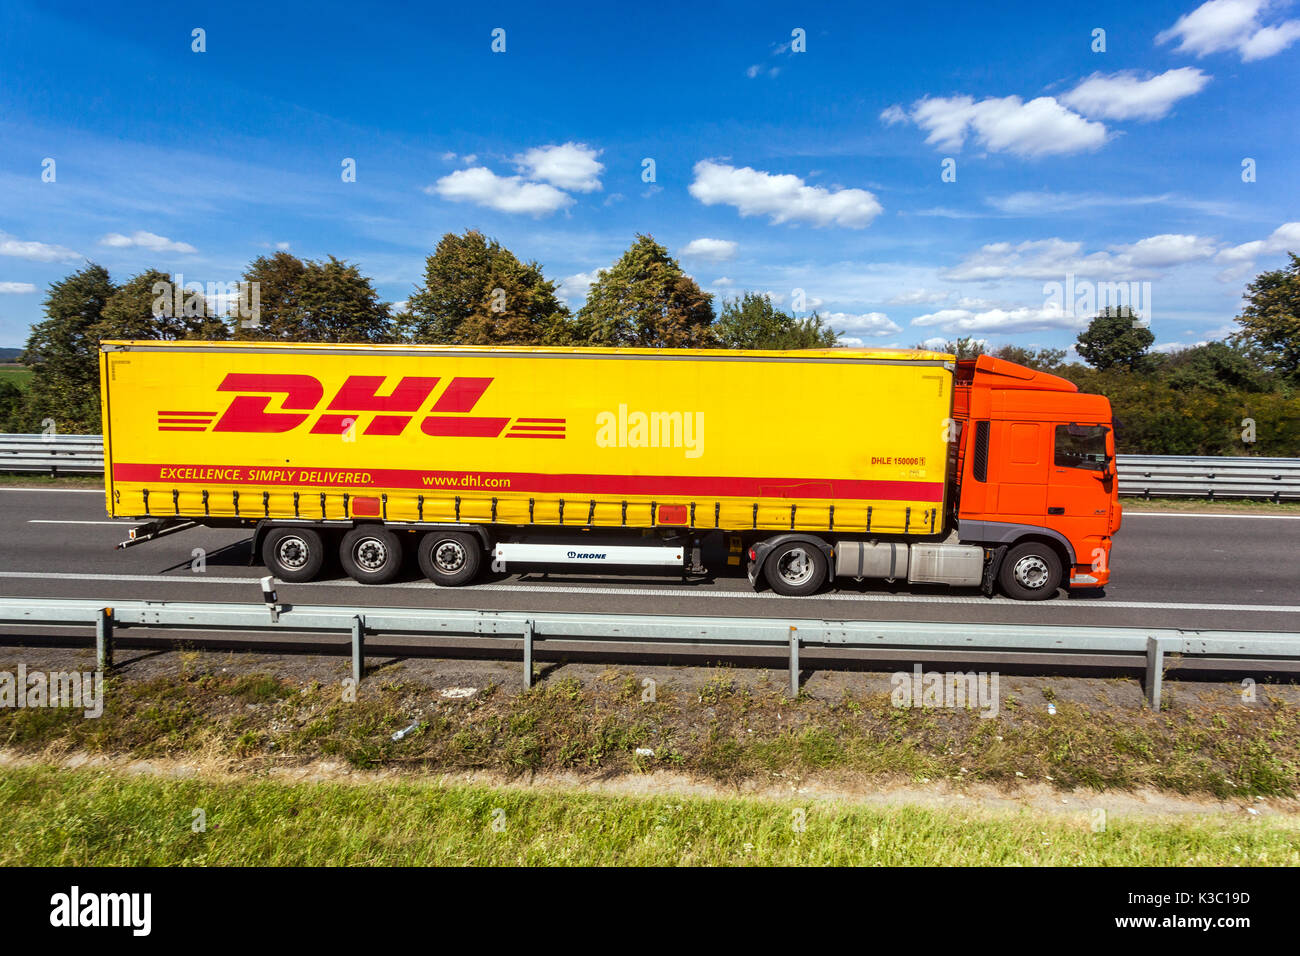 Dhl truck hi-res stock photography and images - Alamy